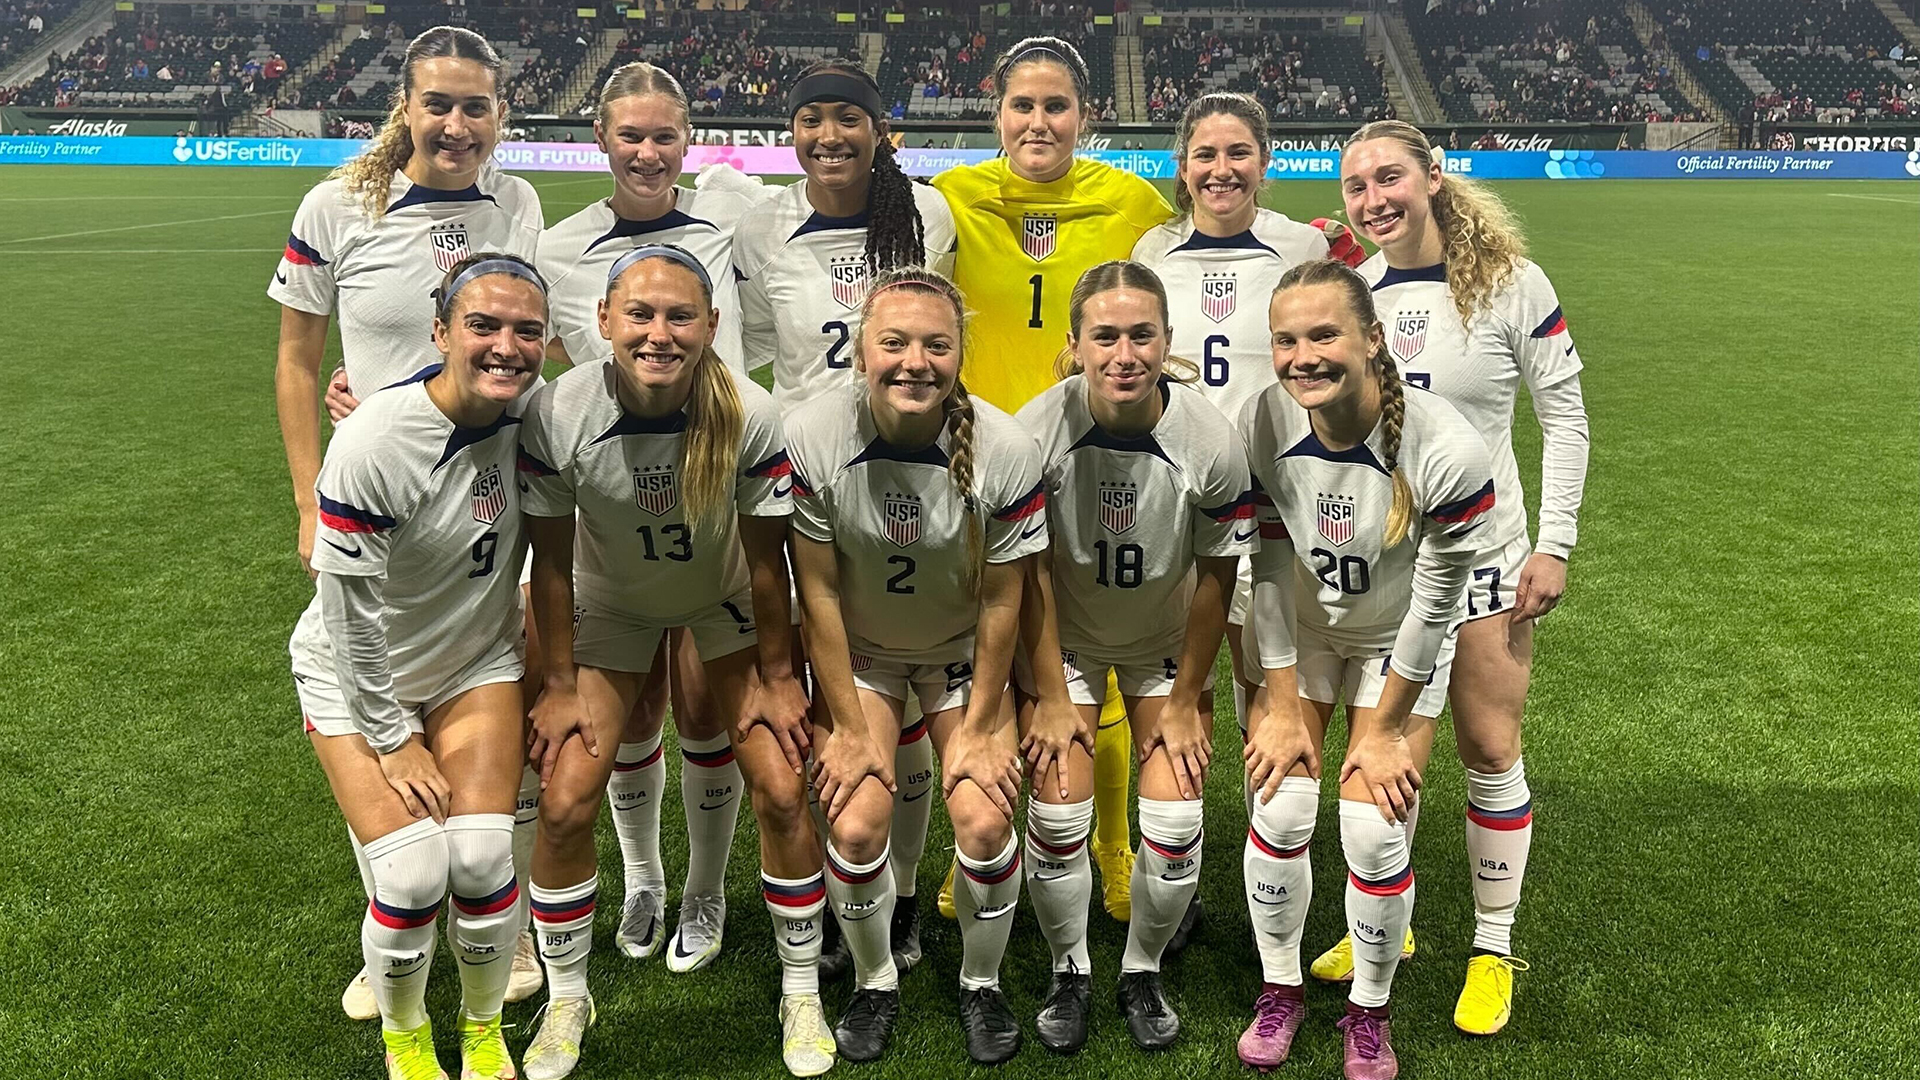 U.S. Under-23 Women’s Youth National Team Falls 4-1 To Portland Thorns In Second Game Of Preseason Tournament | U.S. Soccer Official Website